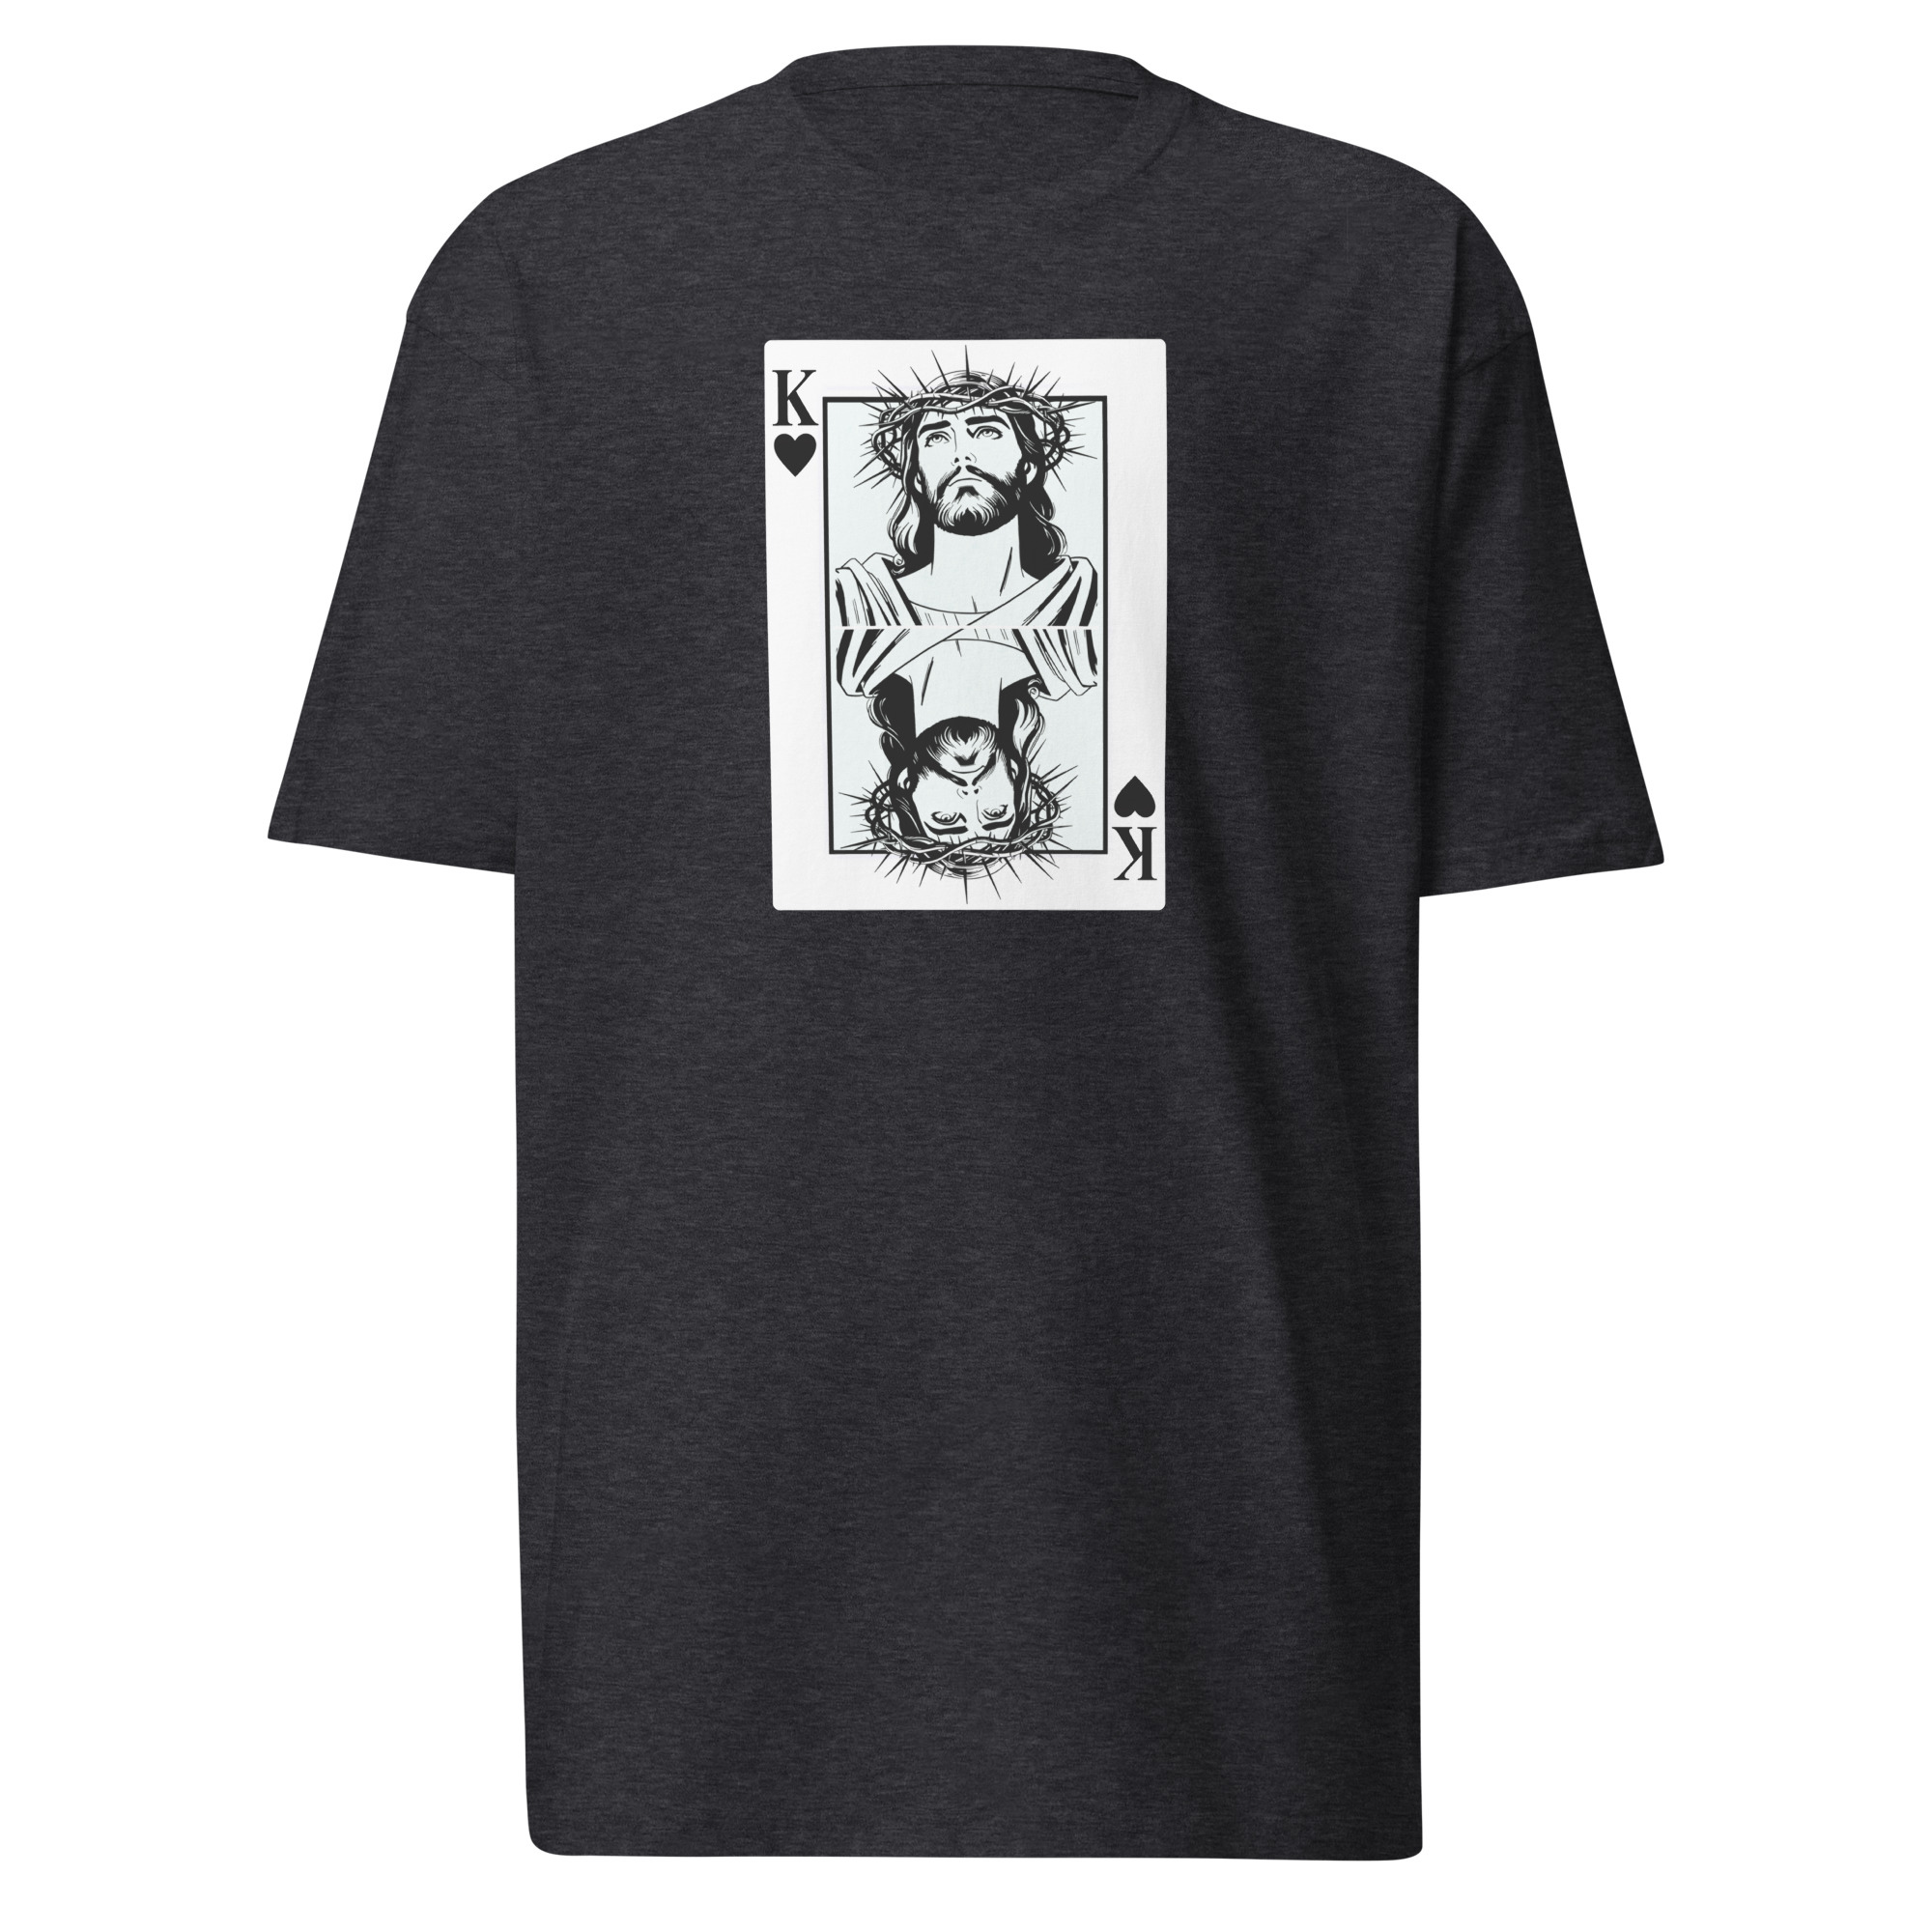 King of King's T-Shirt - Charcoal Heather / M